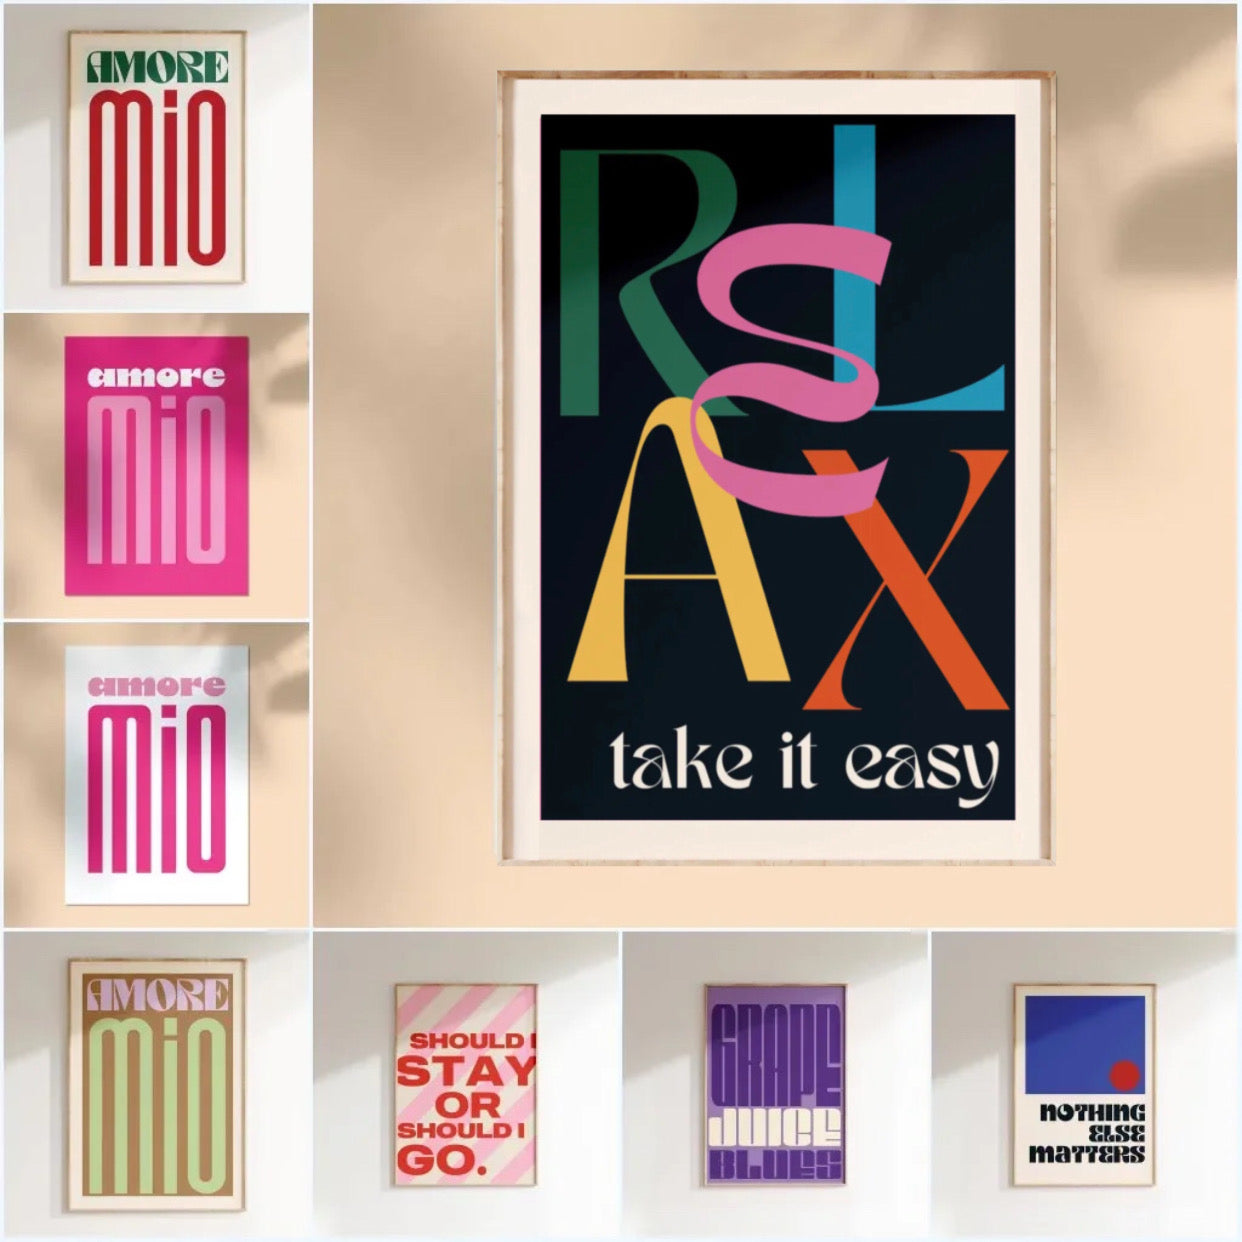 "relax take it easy" poster